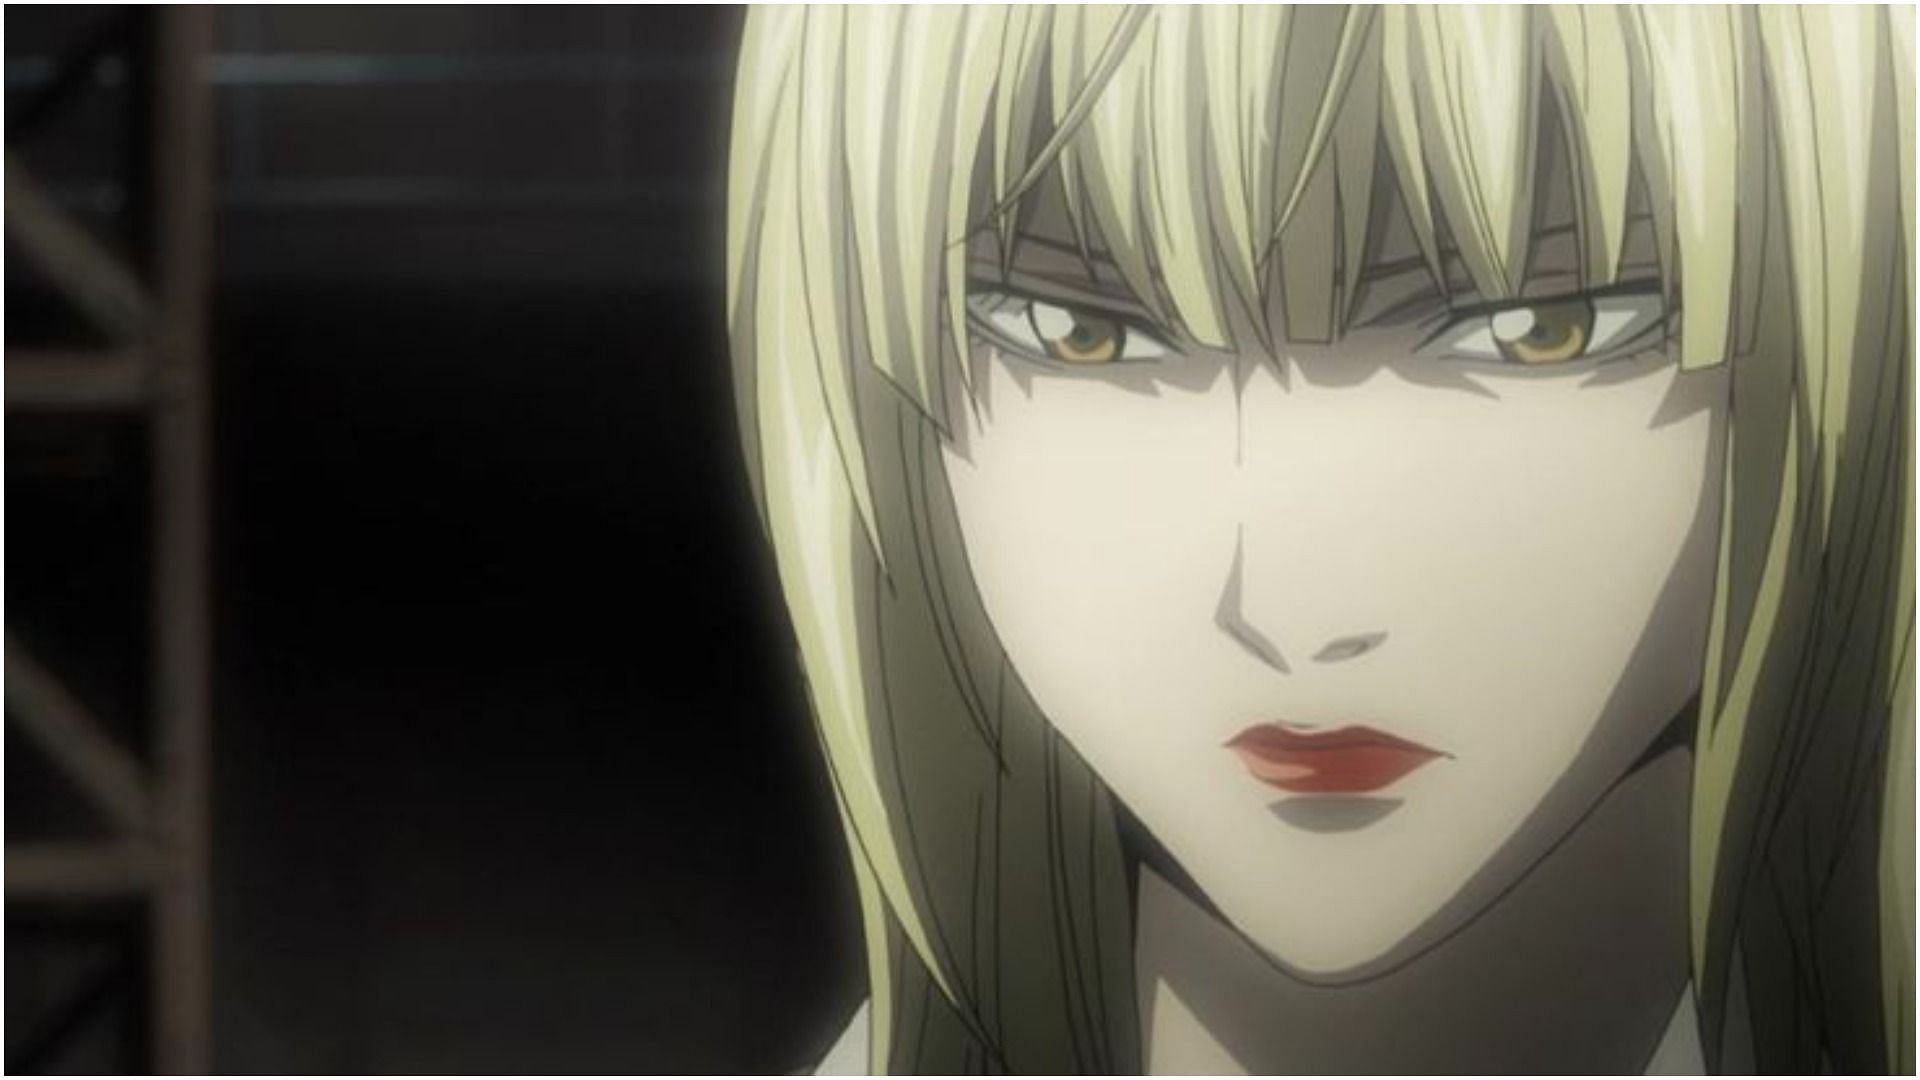 Halle Lidner as seen in Death Note (Image via Madhouse)